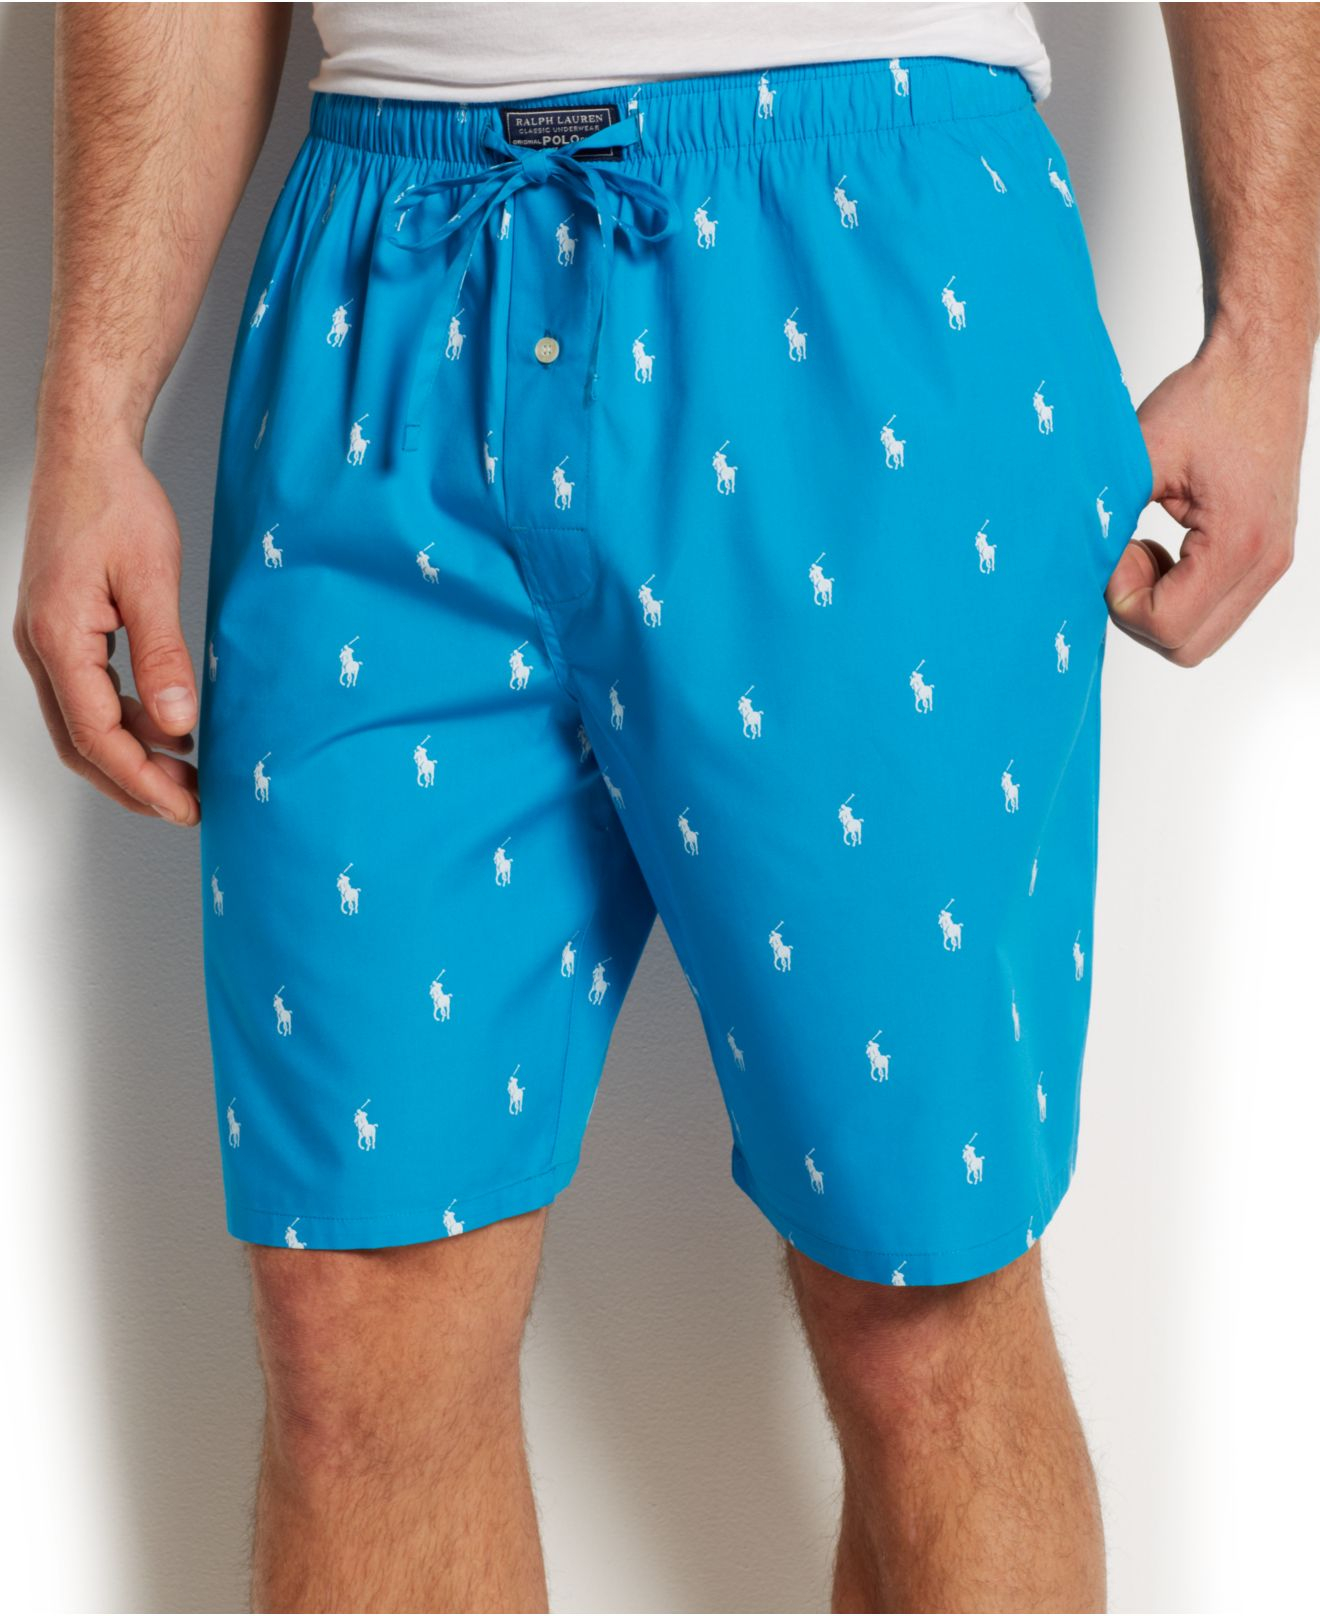 Lyst - Polo Ralph Lauren Allover Pony Pajama Shorts in Blue for Men